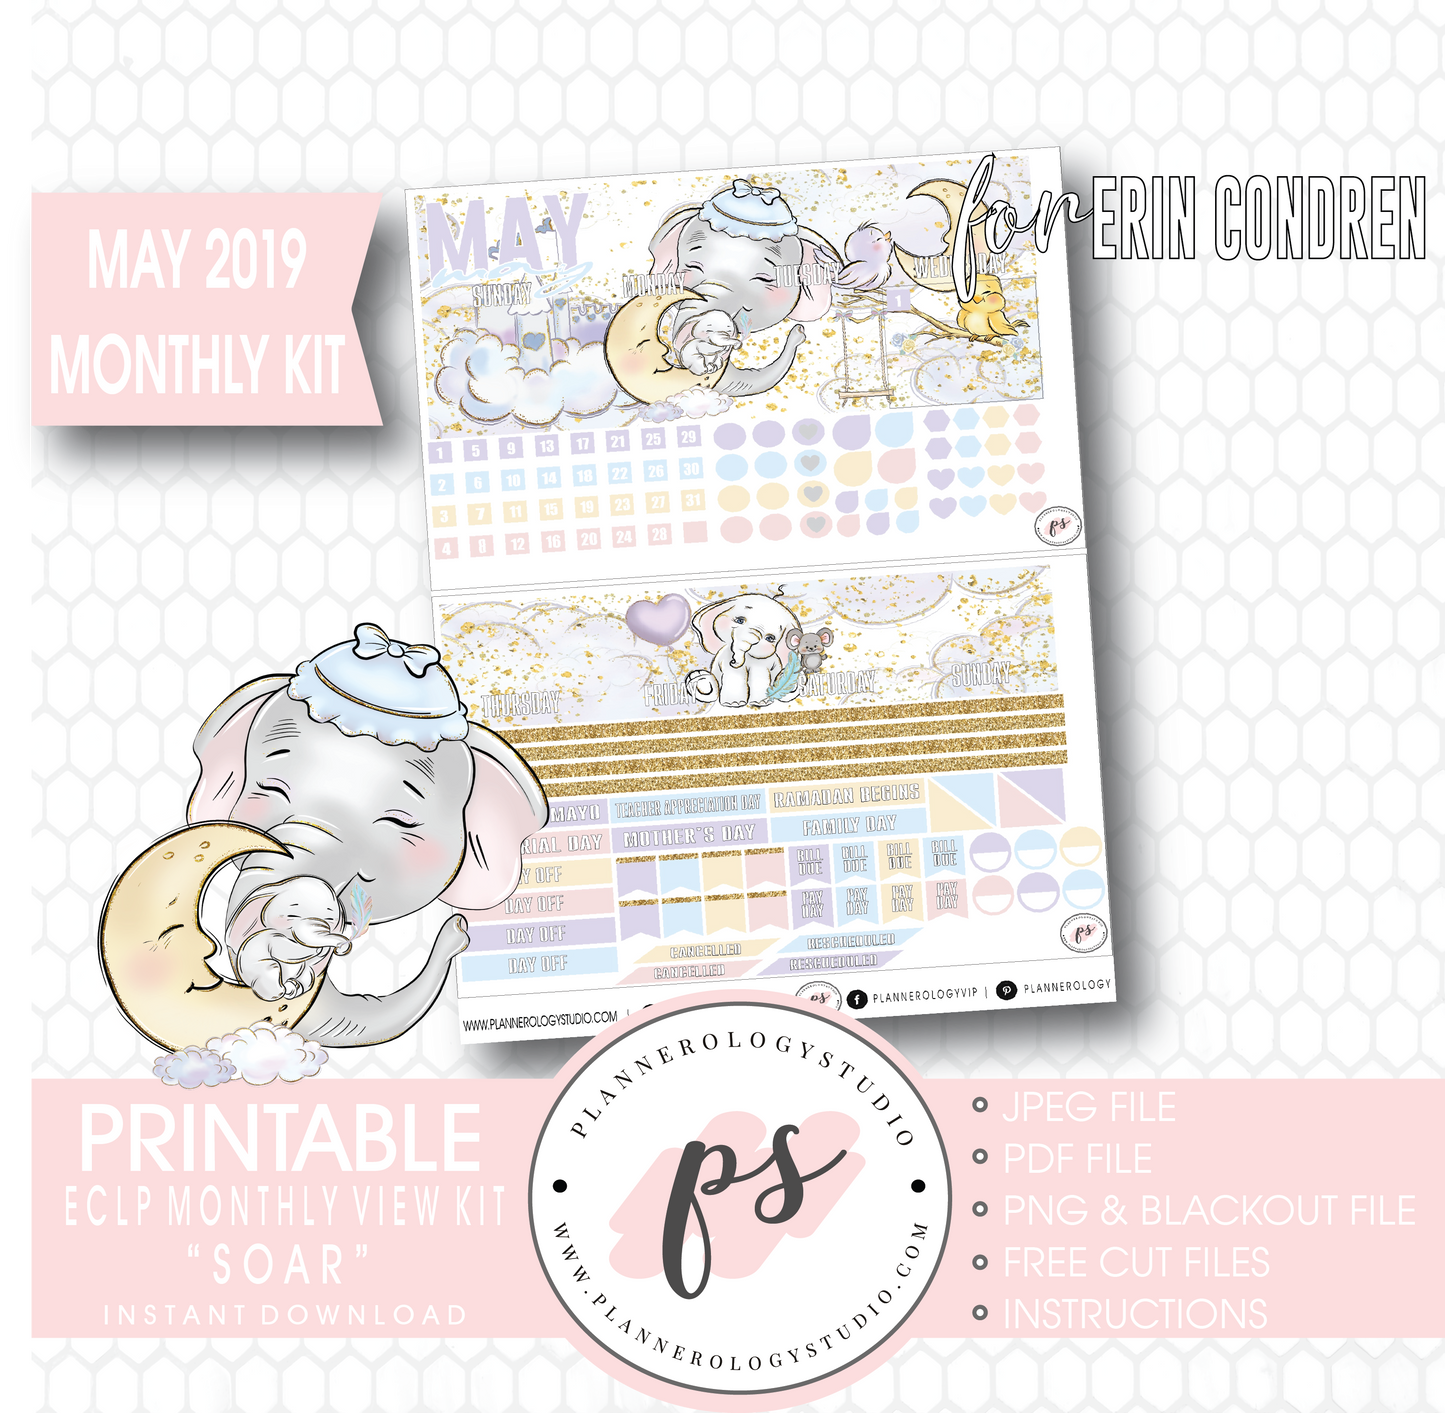 Soar (Dumbo Inspired) May 2019 Monthly View Kit Digital Printable Planner Stickers (for use with Erin Condren) - Plannerologystudio